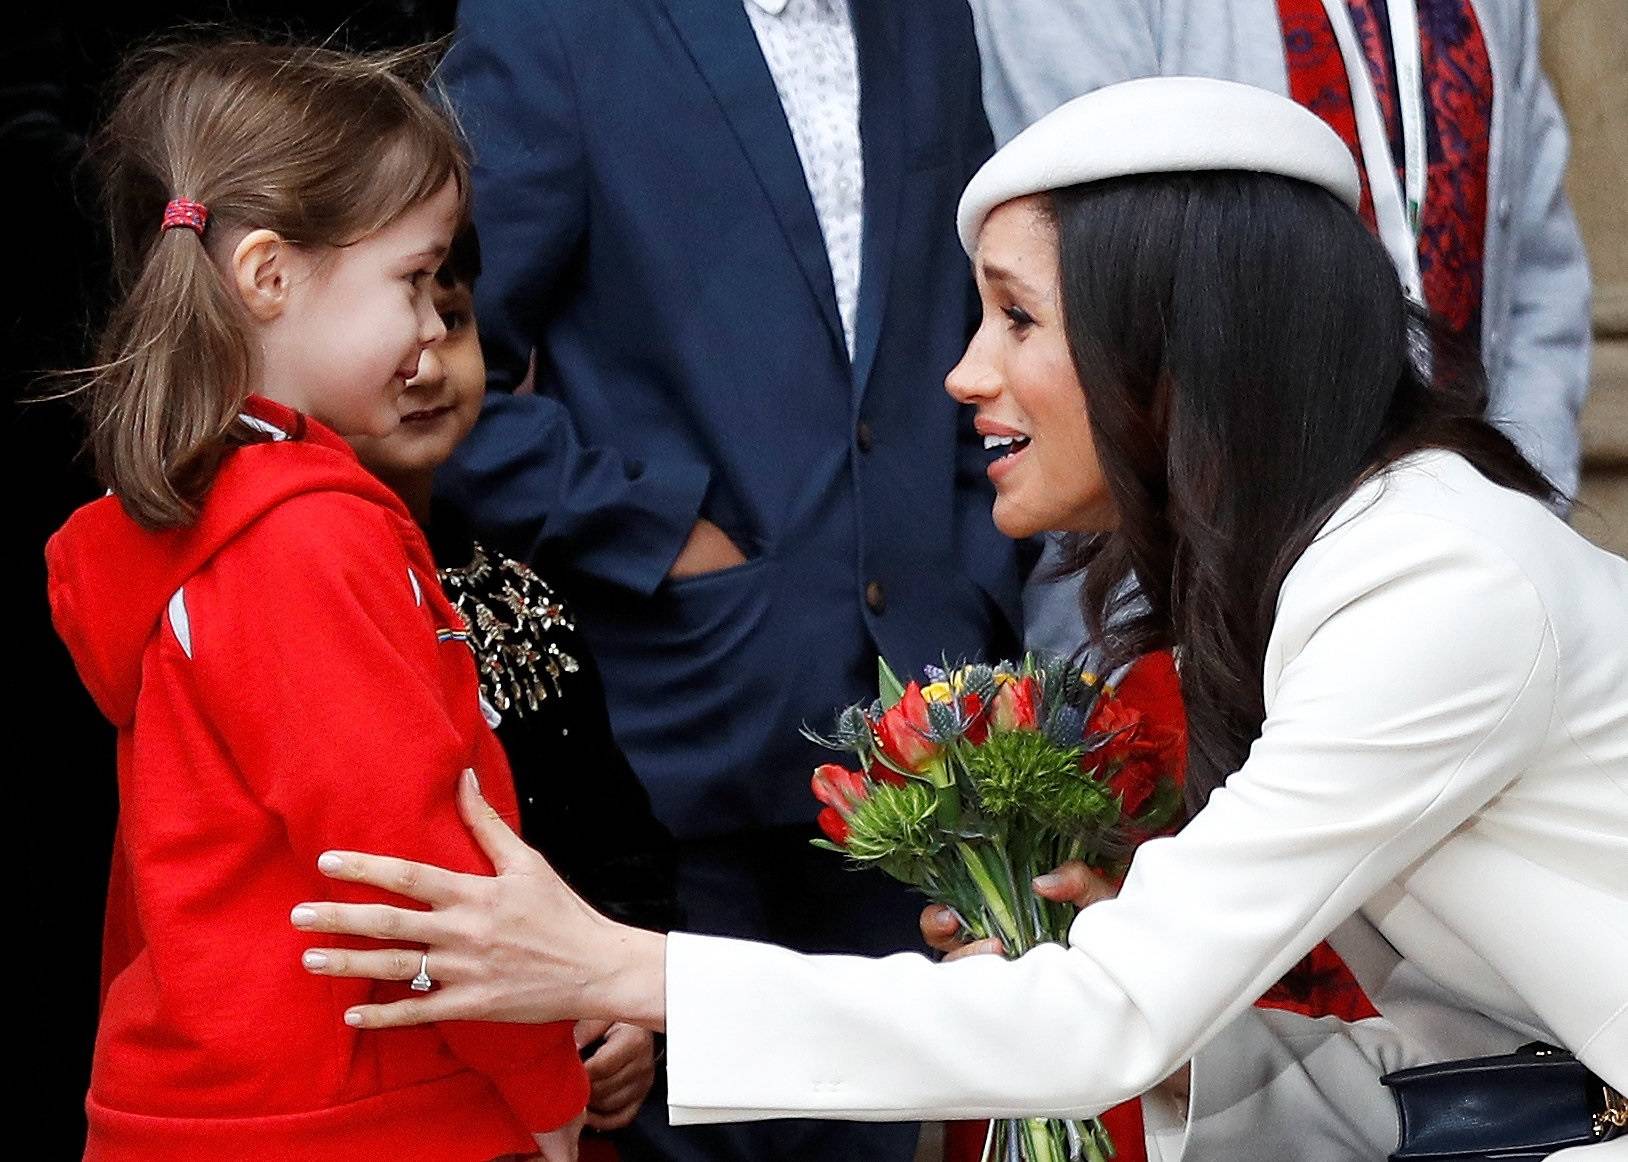 Britain's Prince Harry's fiancee Meghan Markle receives a bouquet of flowers after attending the Commonwealth Service at Westminster Abbey in London